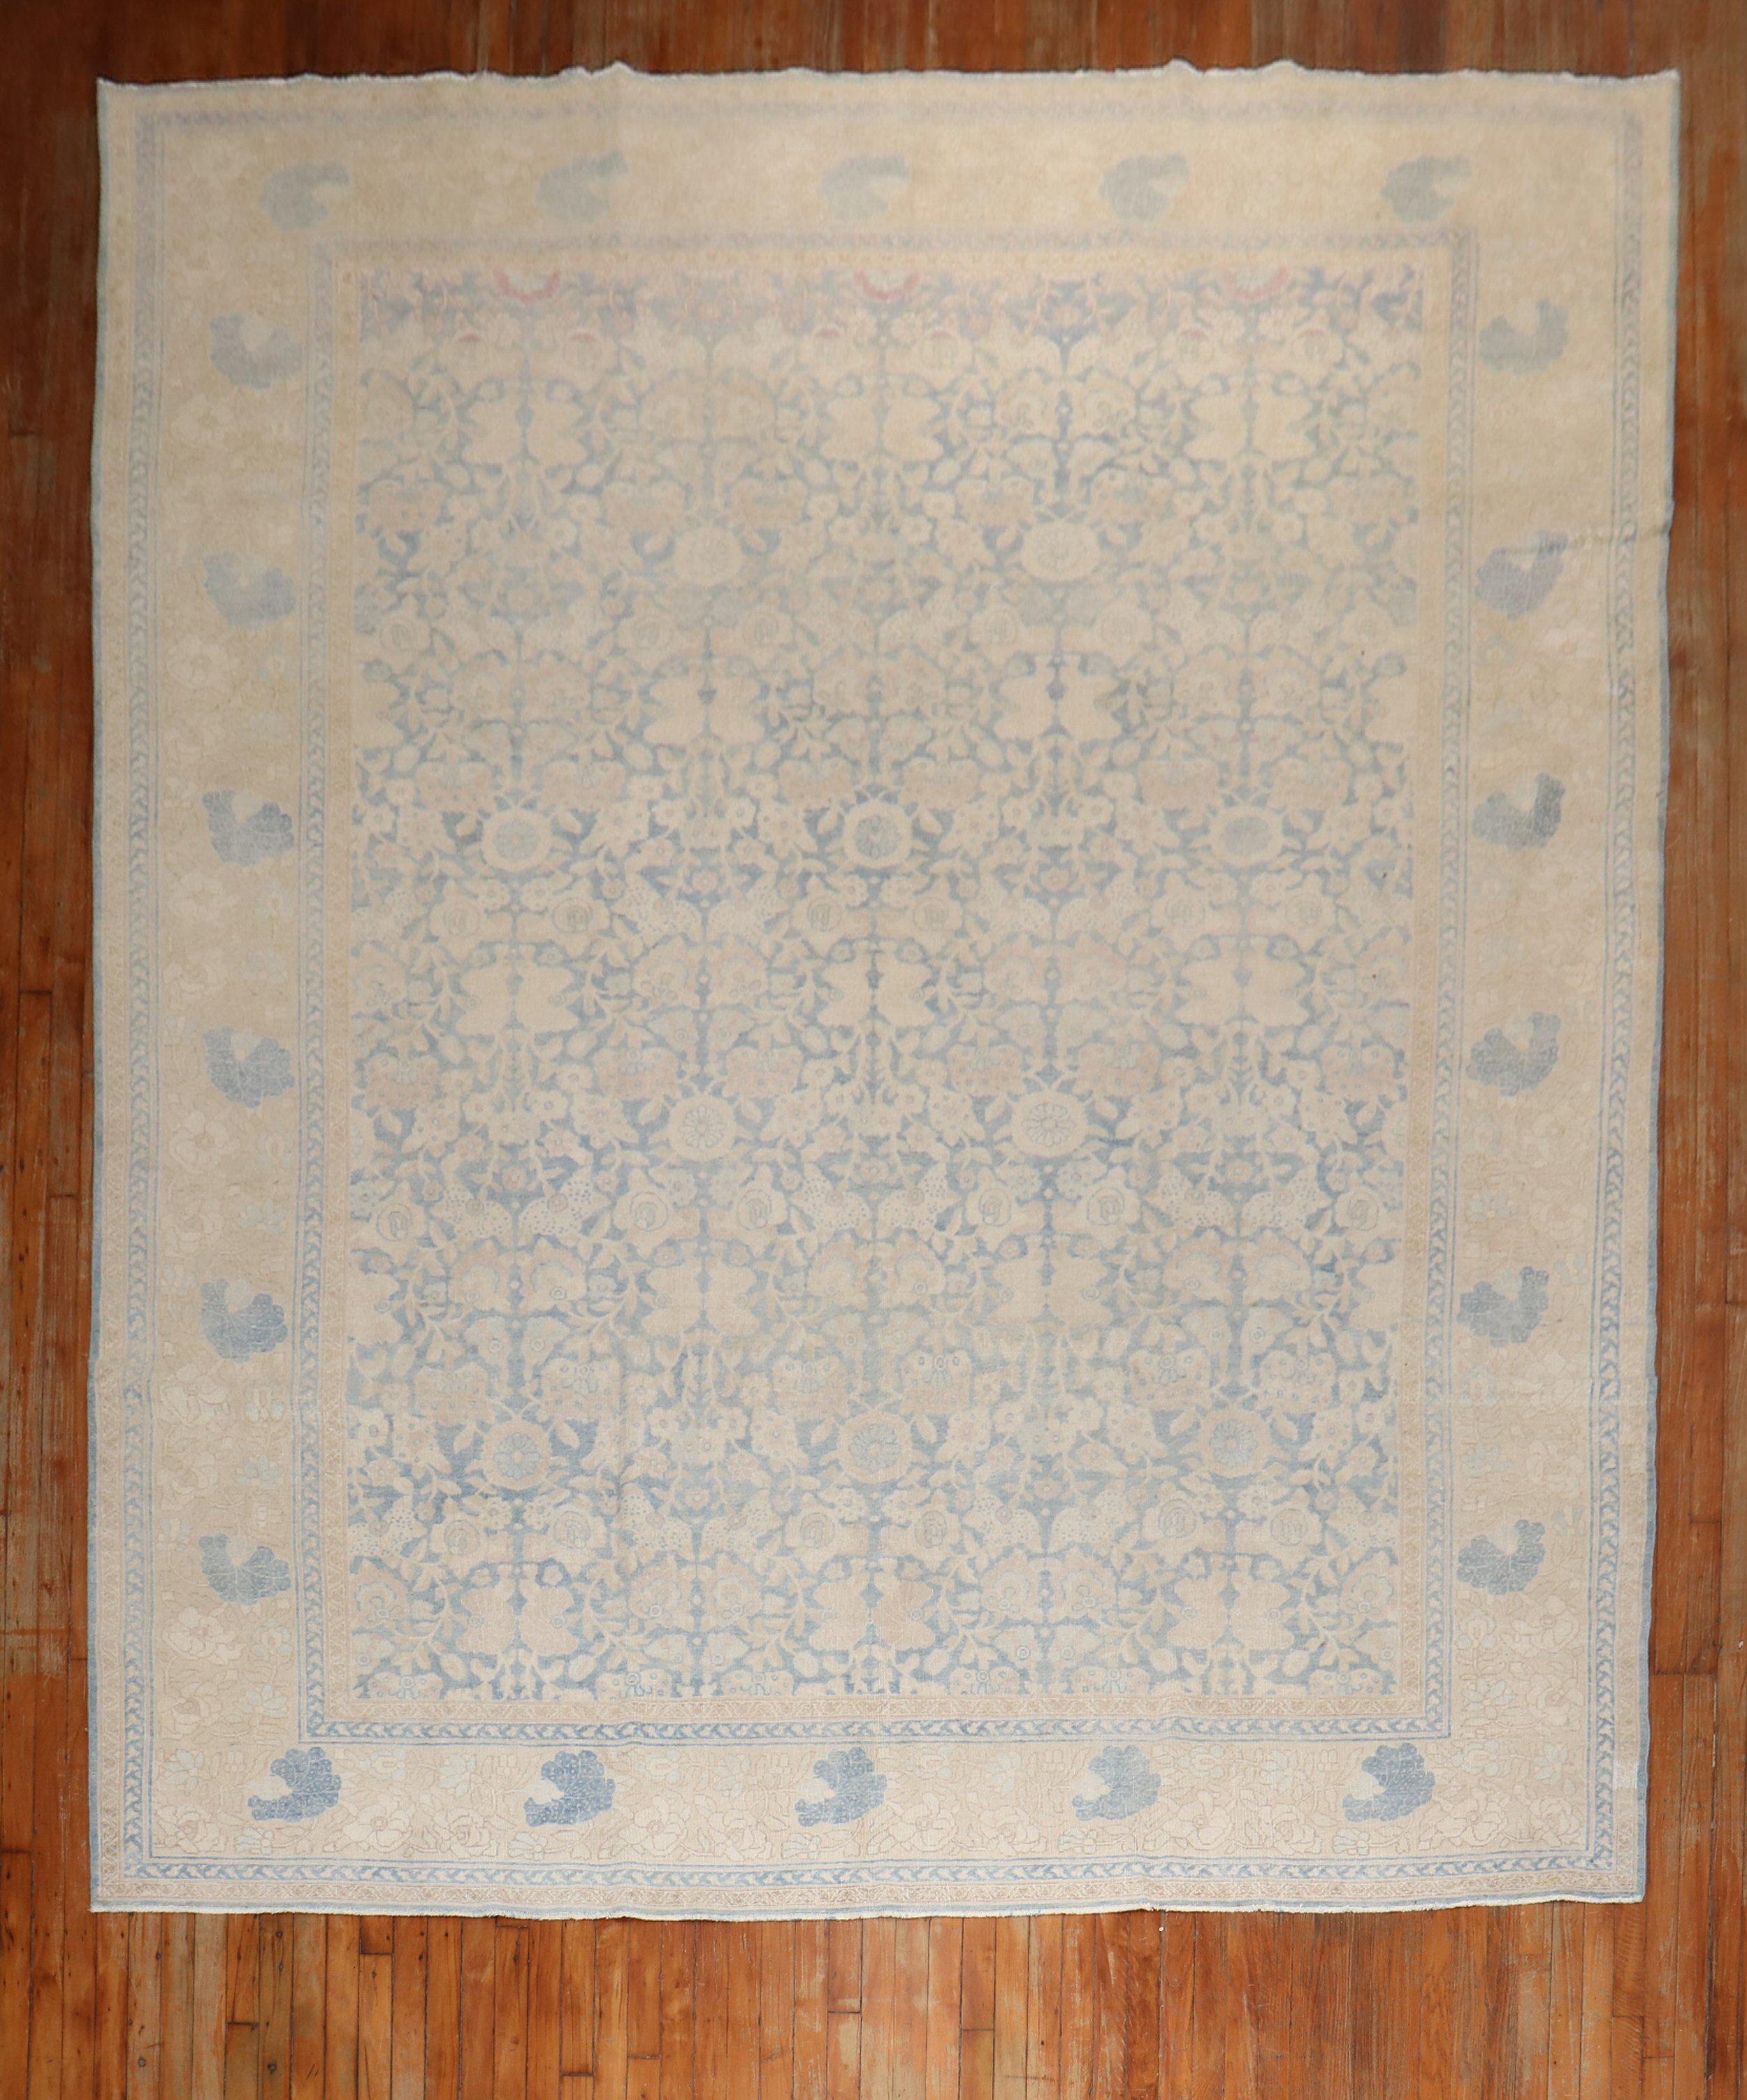 Persian Tabriz rug from the 3rd quarter of the 20th century

Measures: 9' x 13'.